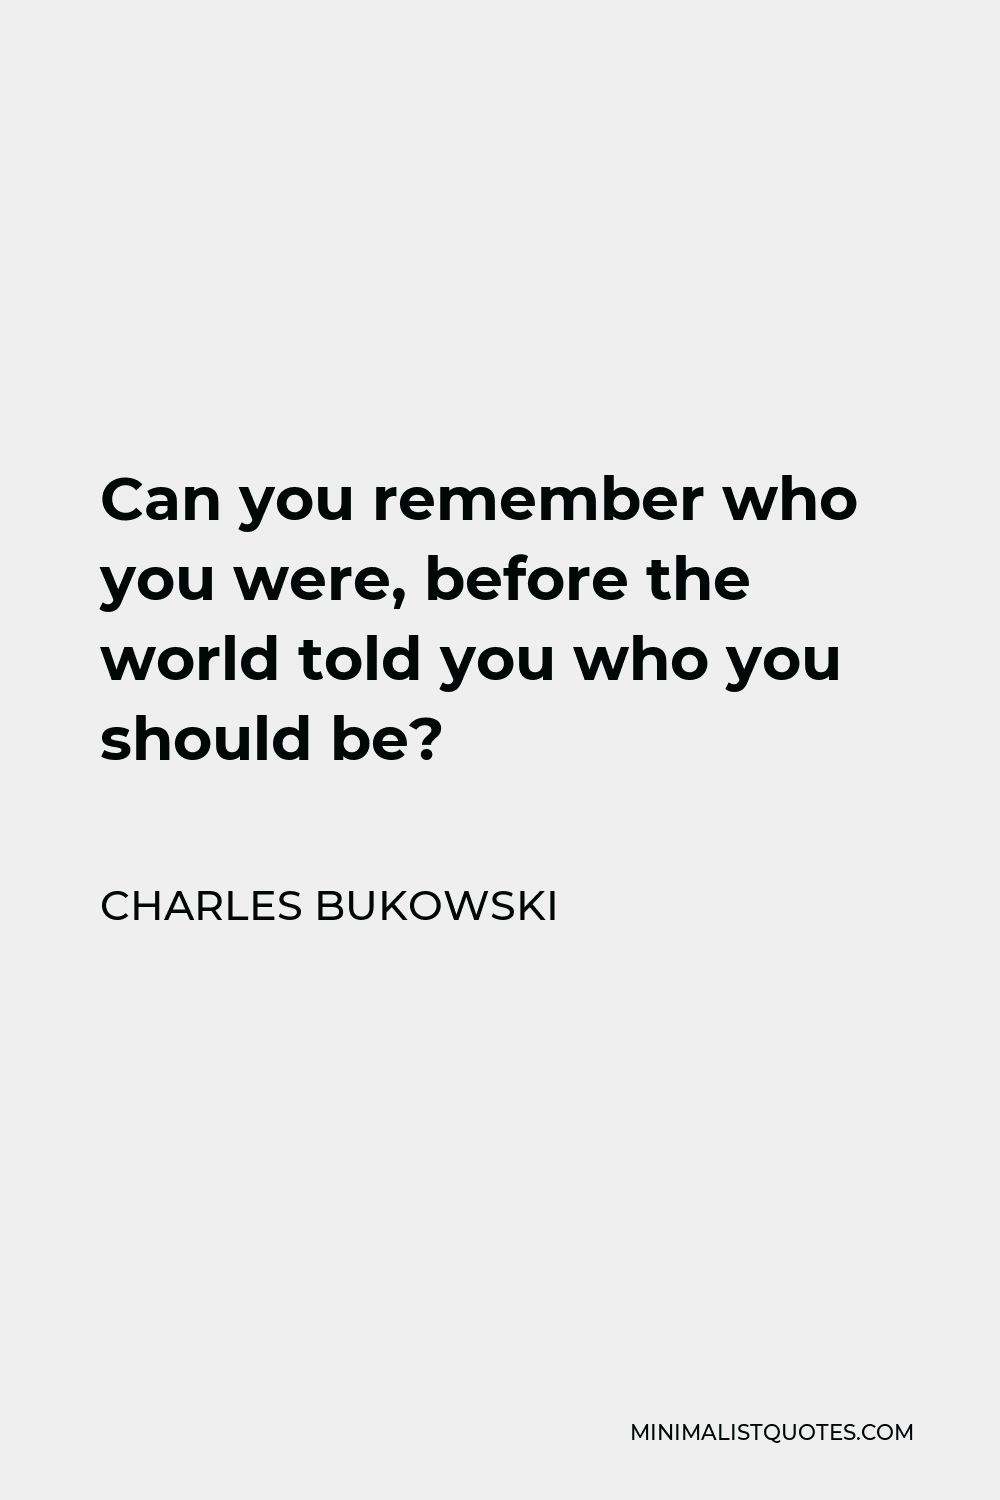 Charles Bukowski Quote - Can you remember who you were, before the world told you who you should be?